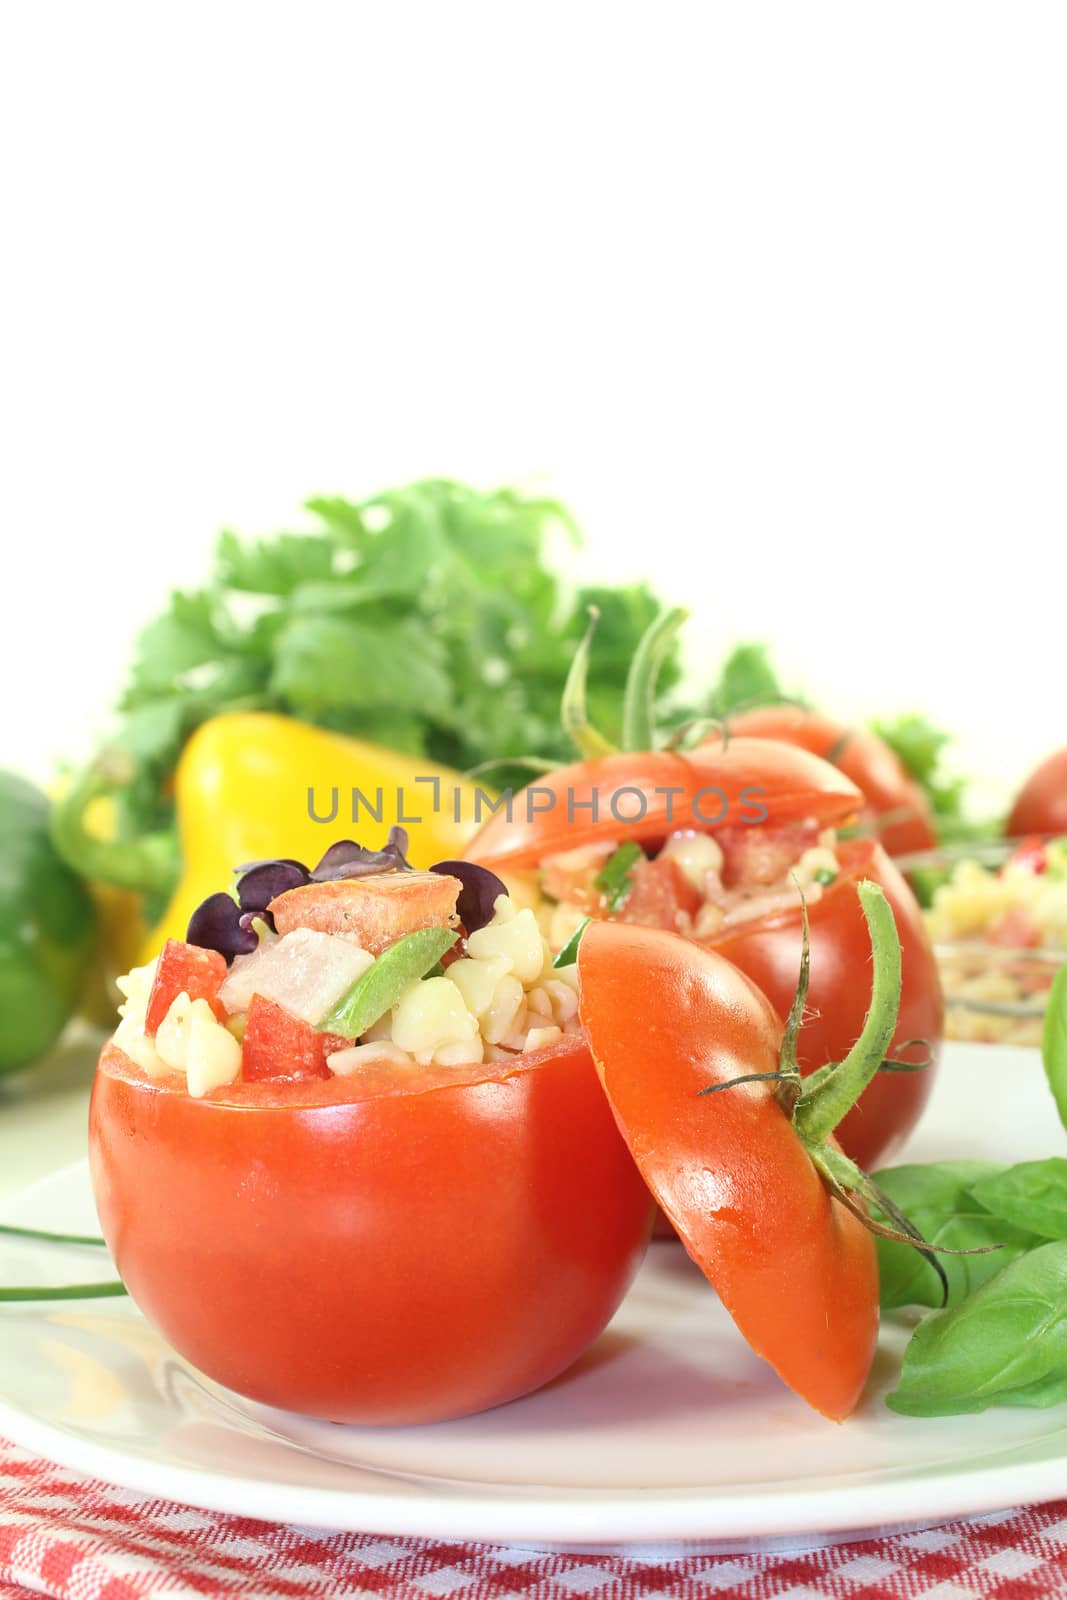 stuffed tomatoes with pasta salad and basil by discovery